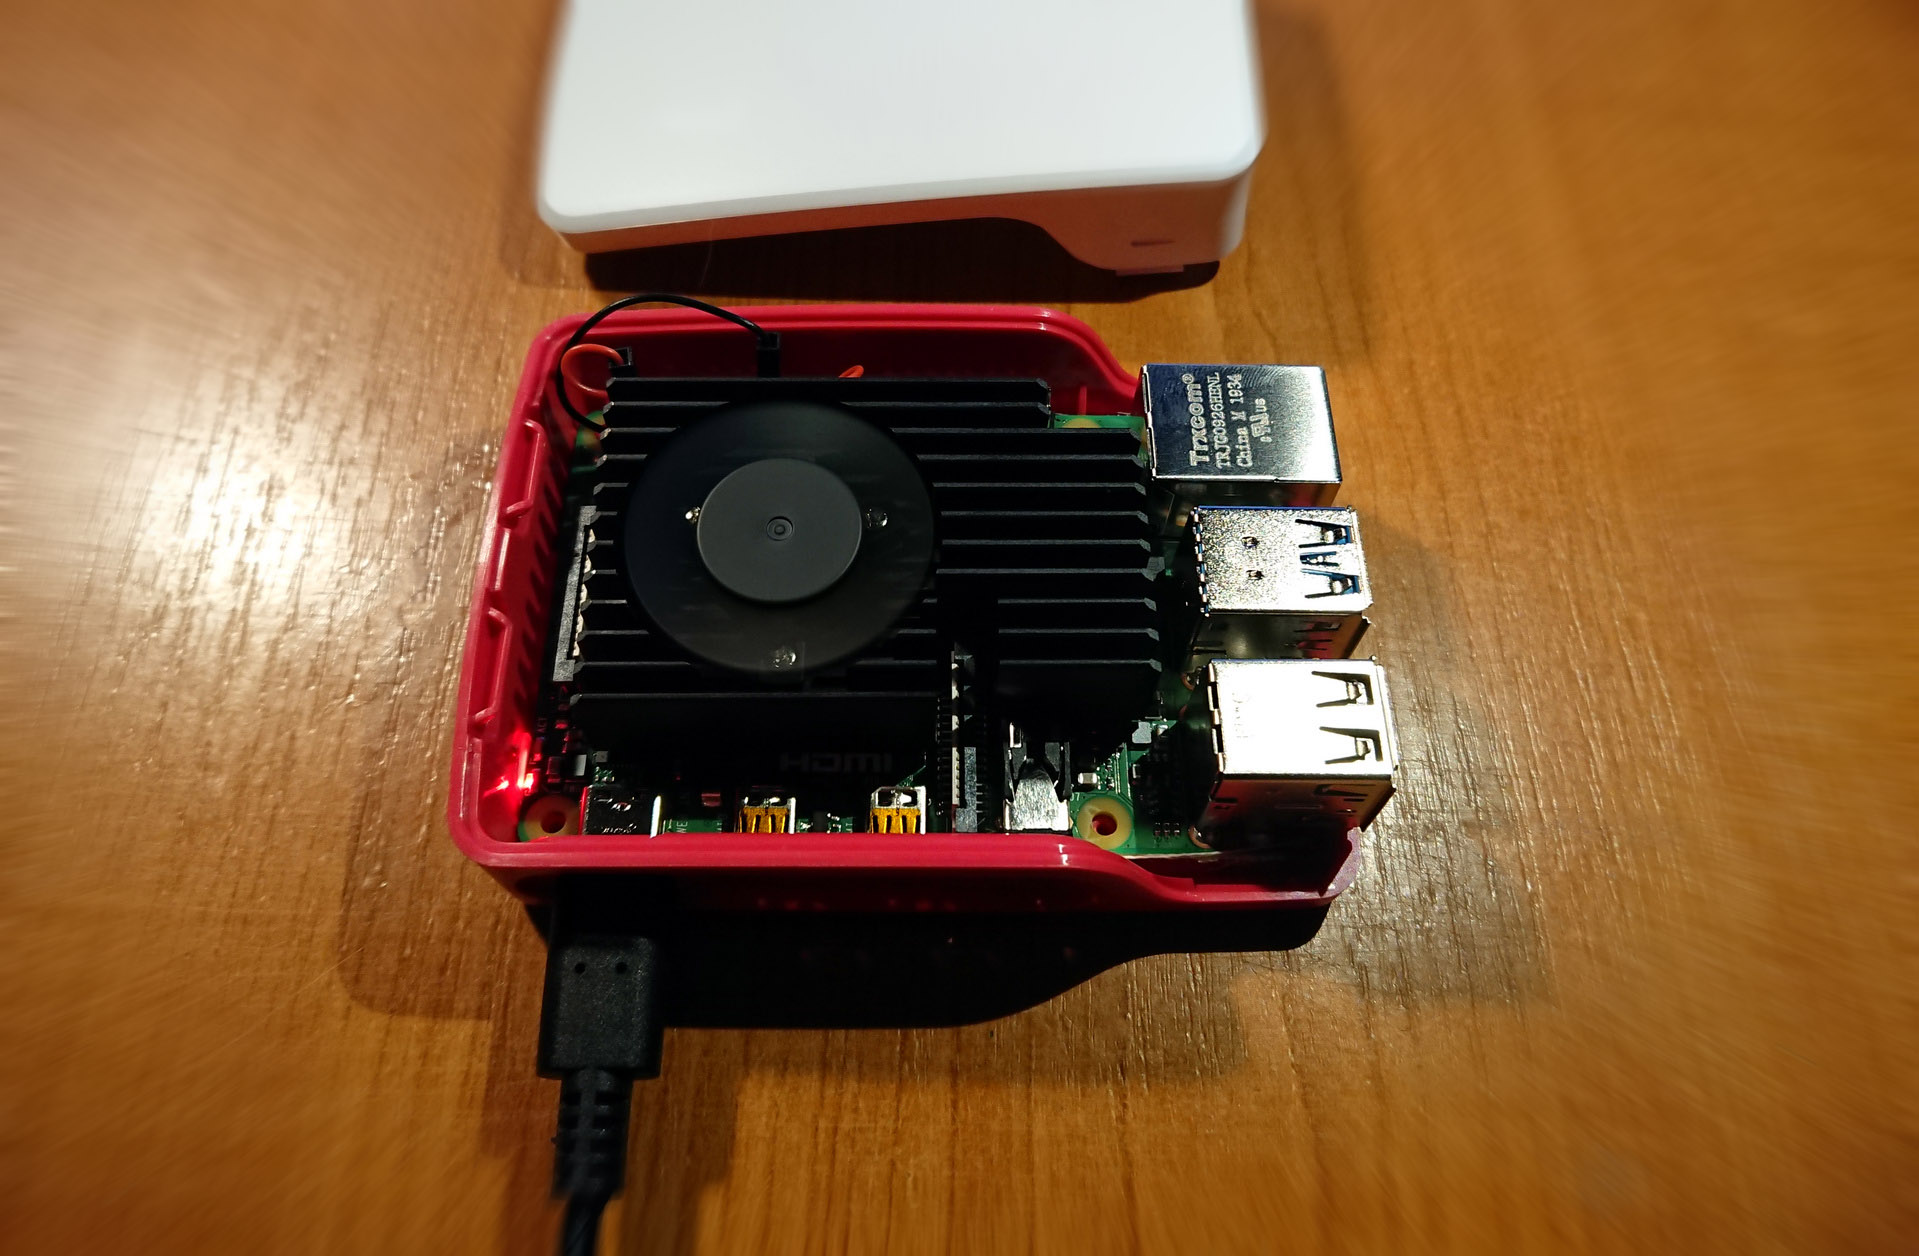 How to pre-configure Raspberry PI for remote SSH and Wifi